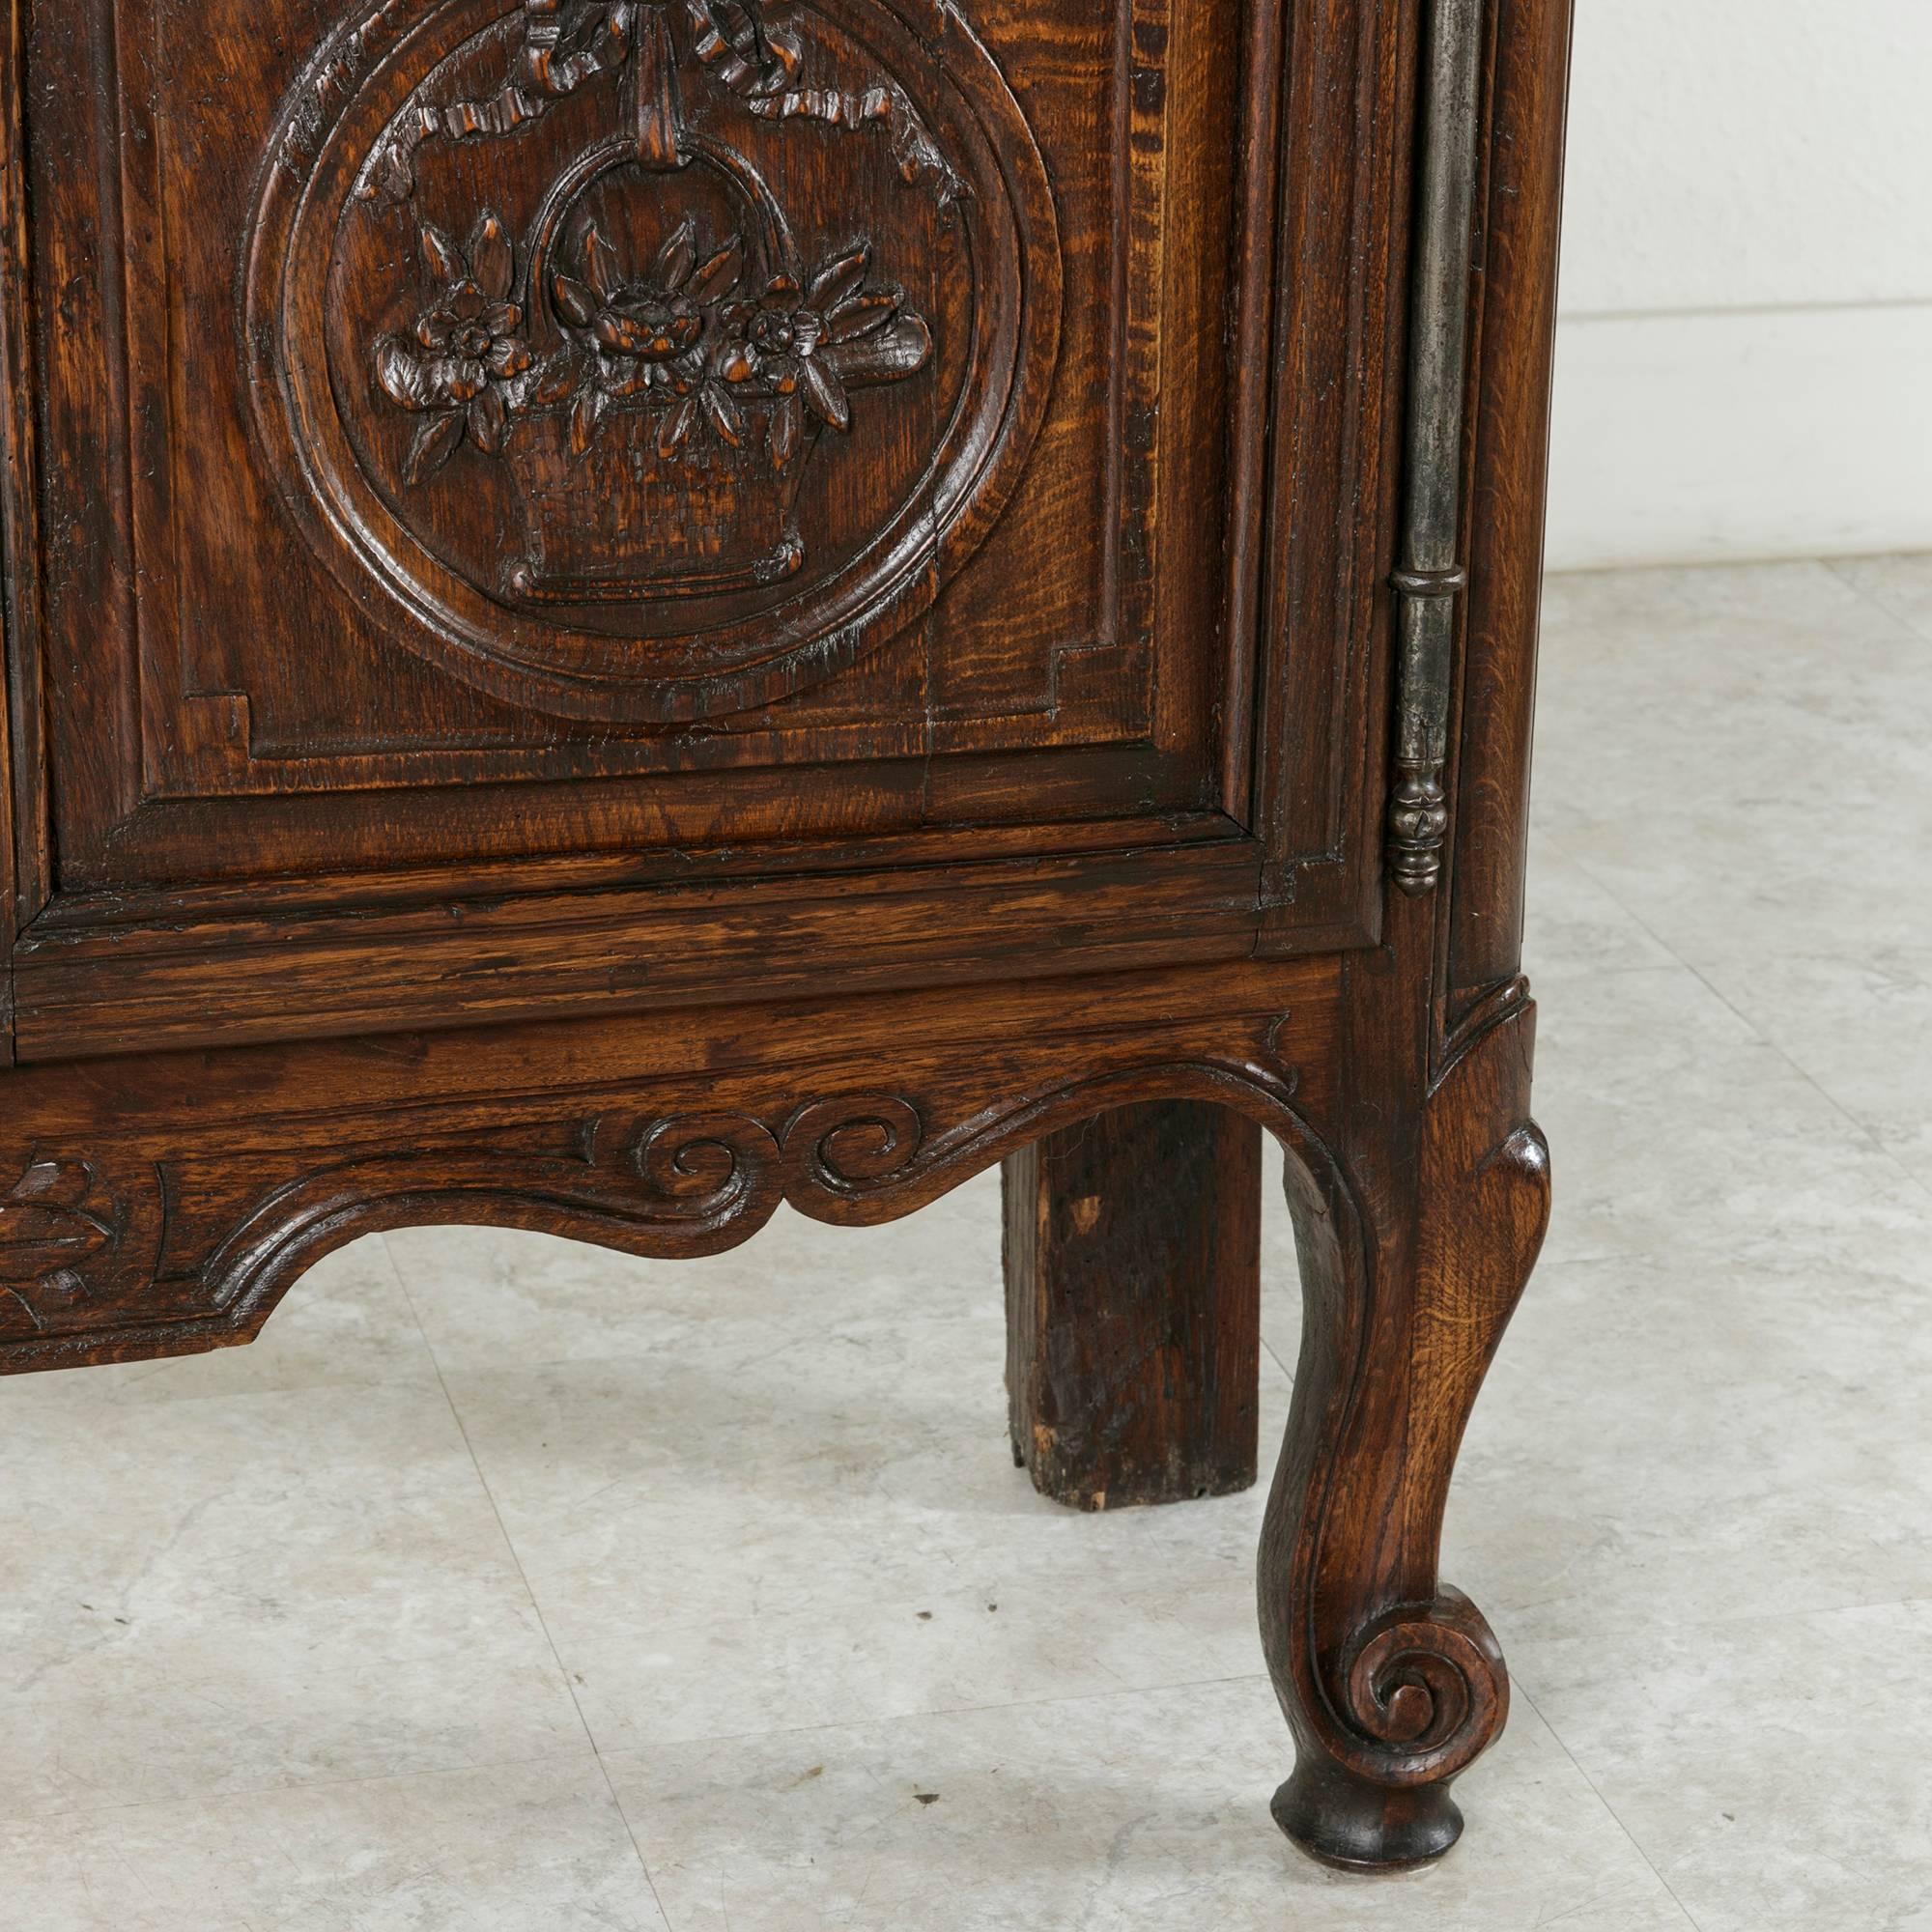 This 19th century hand-carved oak Louis XV style vitrine features classic Normandy baskets in deep relief, long fiche hinges and original glass. The French oak has aged to a beautiful deep hue, while the hand-carved ornamentation is carried across